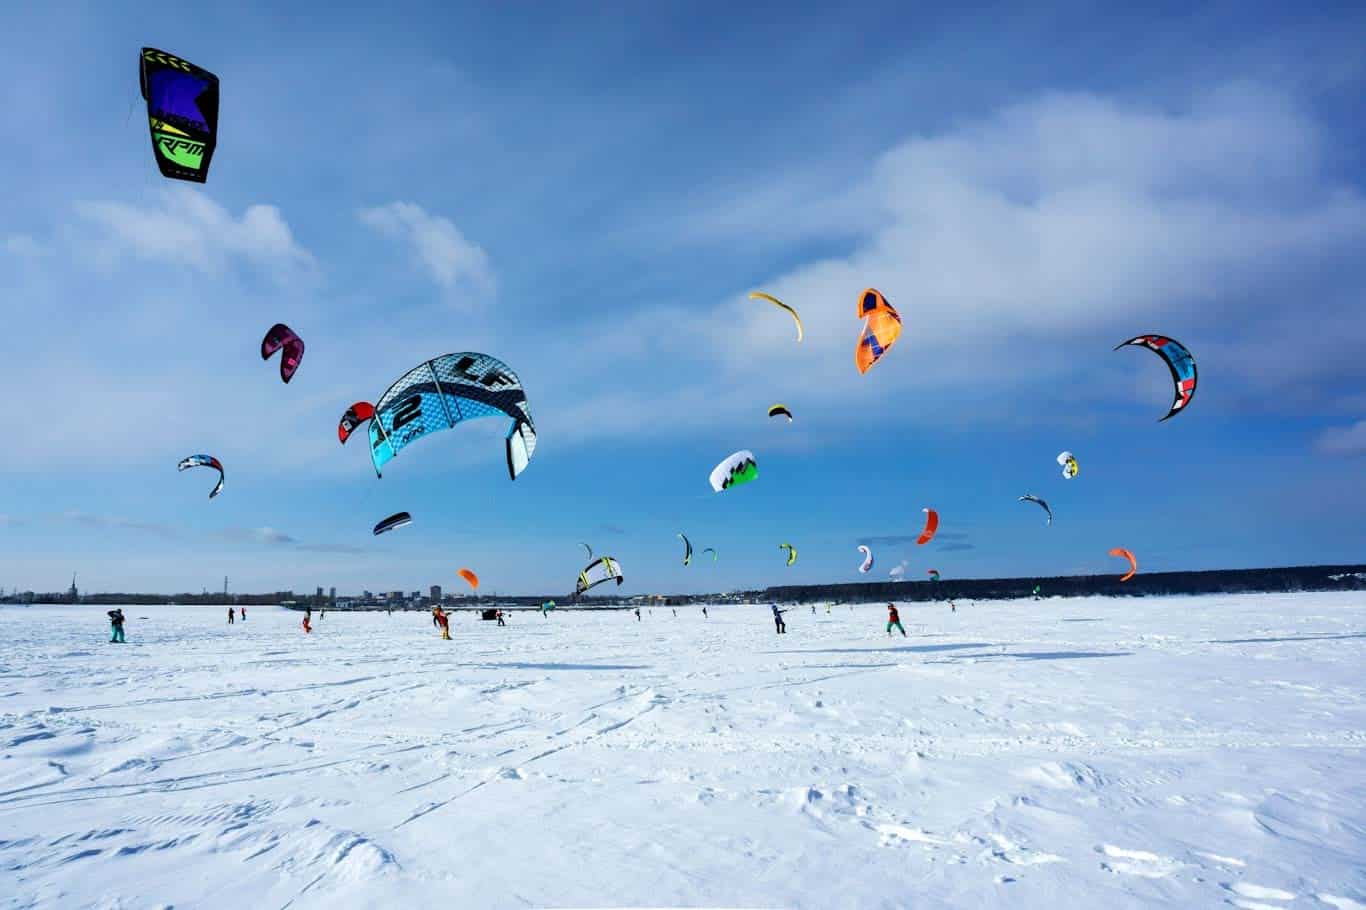 Kites over a large snow field